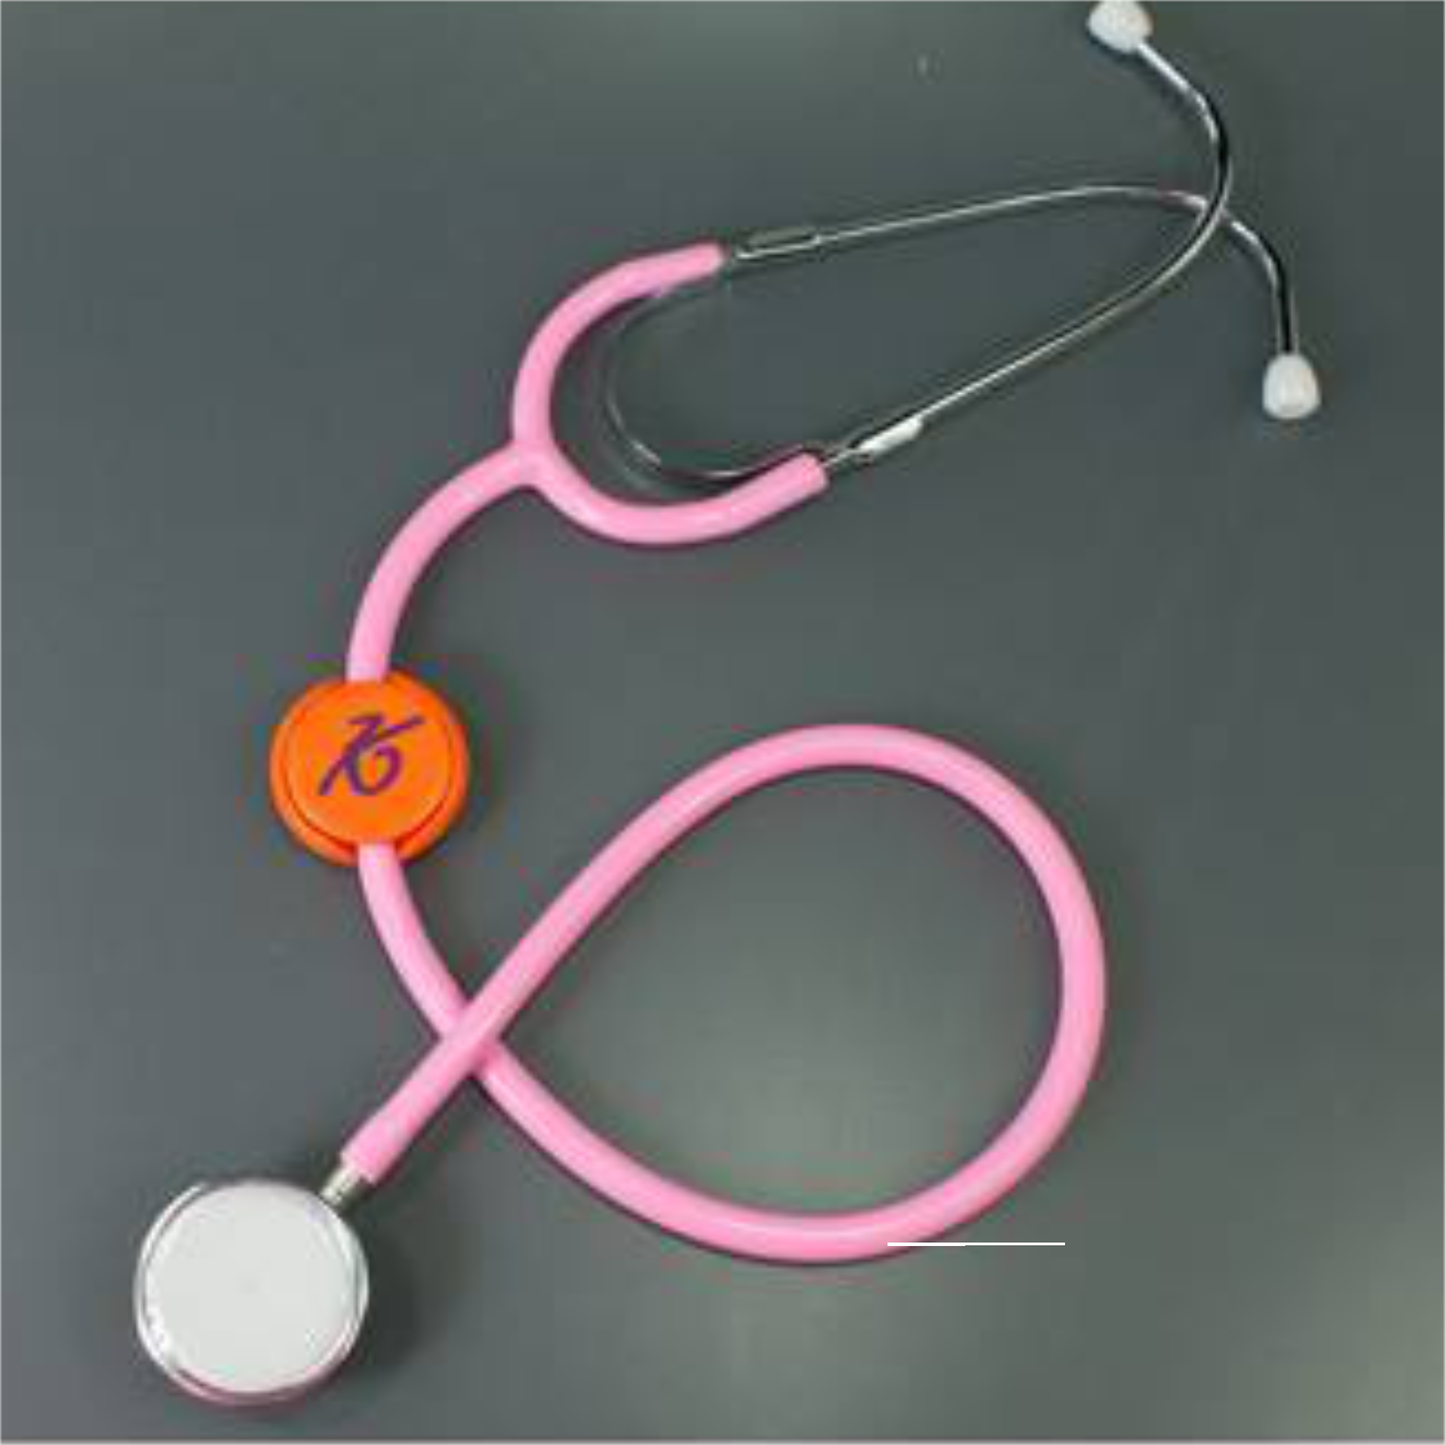 Stethoscope ID Cover Plastic Blank  - Set of 5